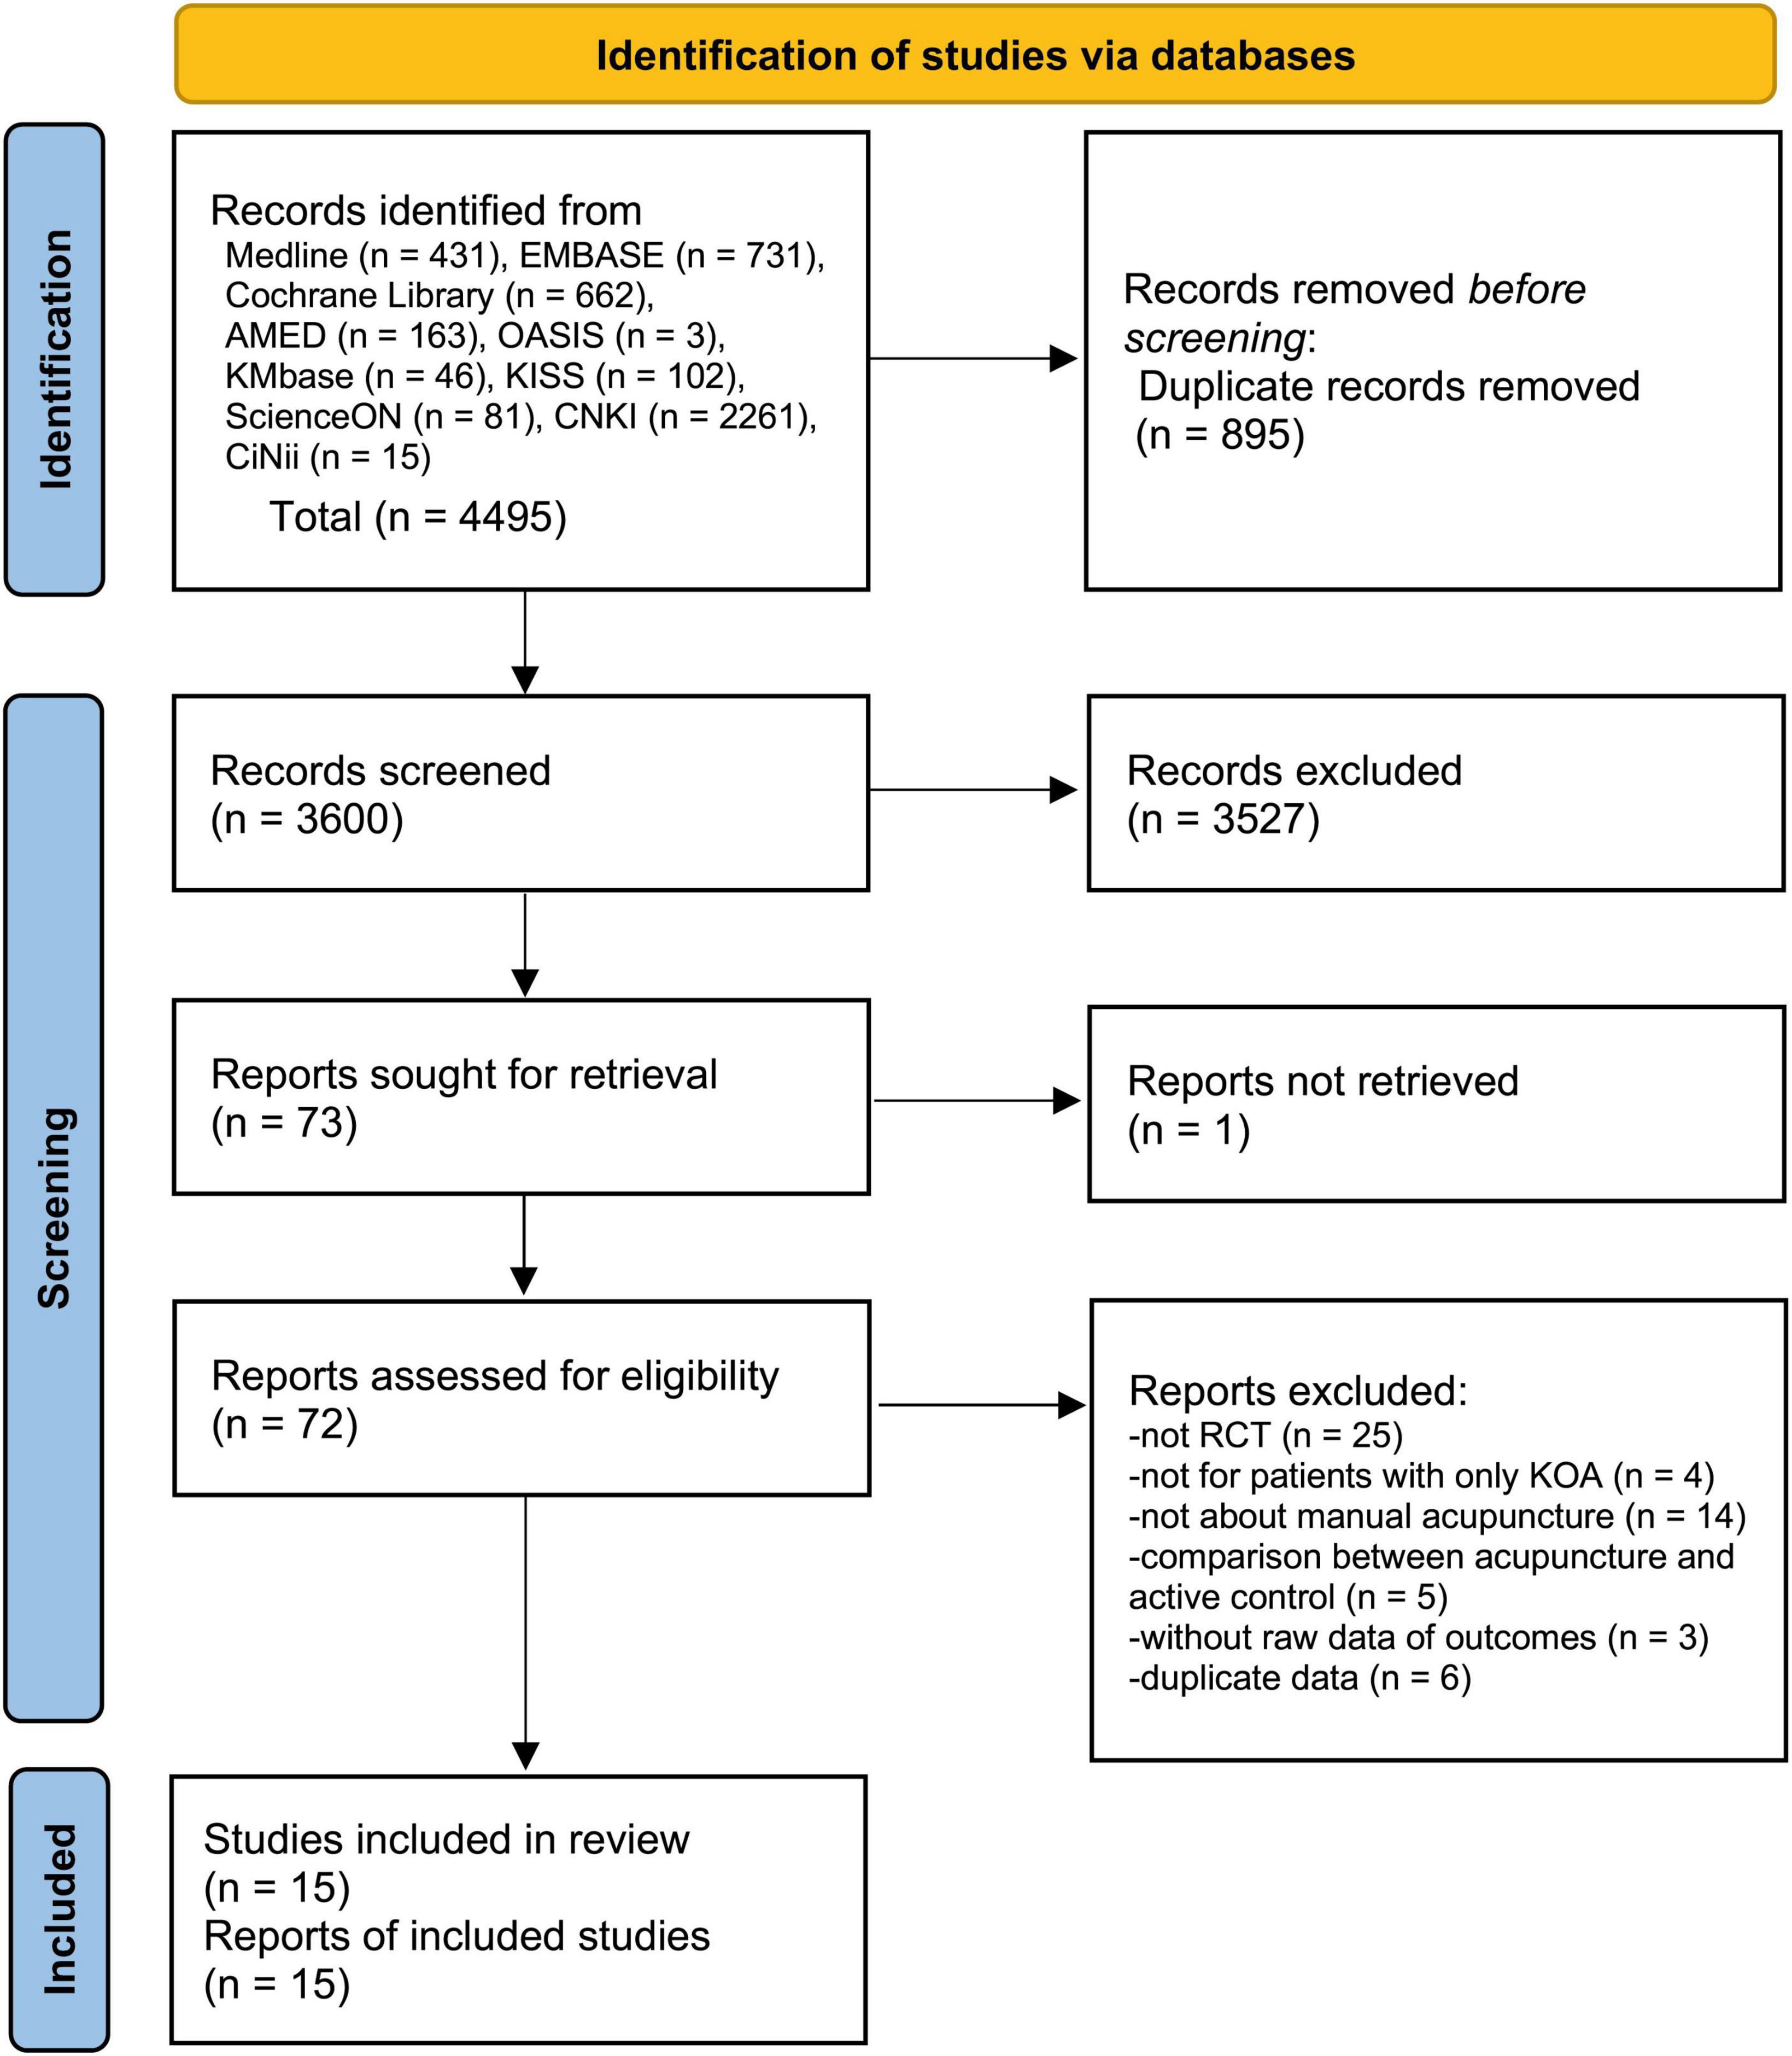 Comparative effectiveness of acupuncture in sham-controlled trials for knee osteoarthritis: A systematic review and network meta-analysis